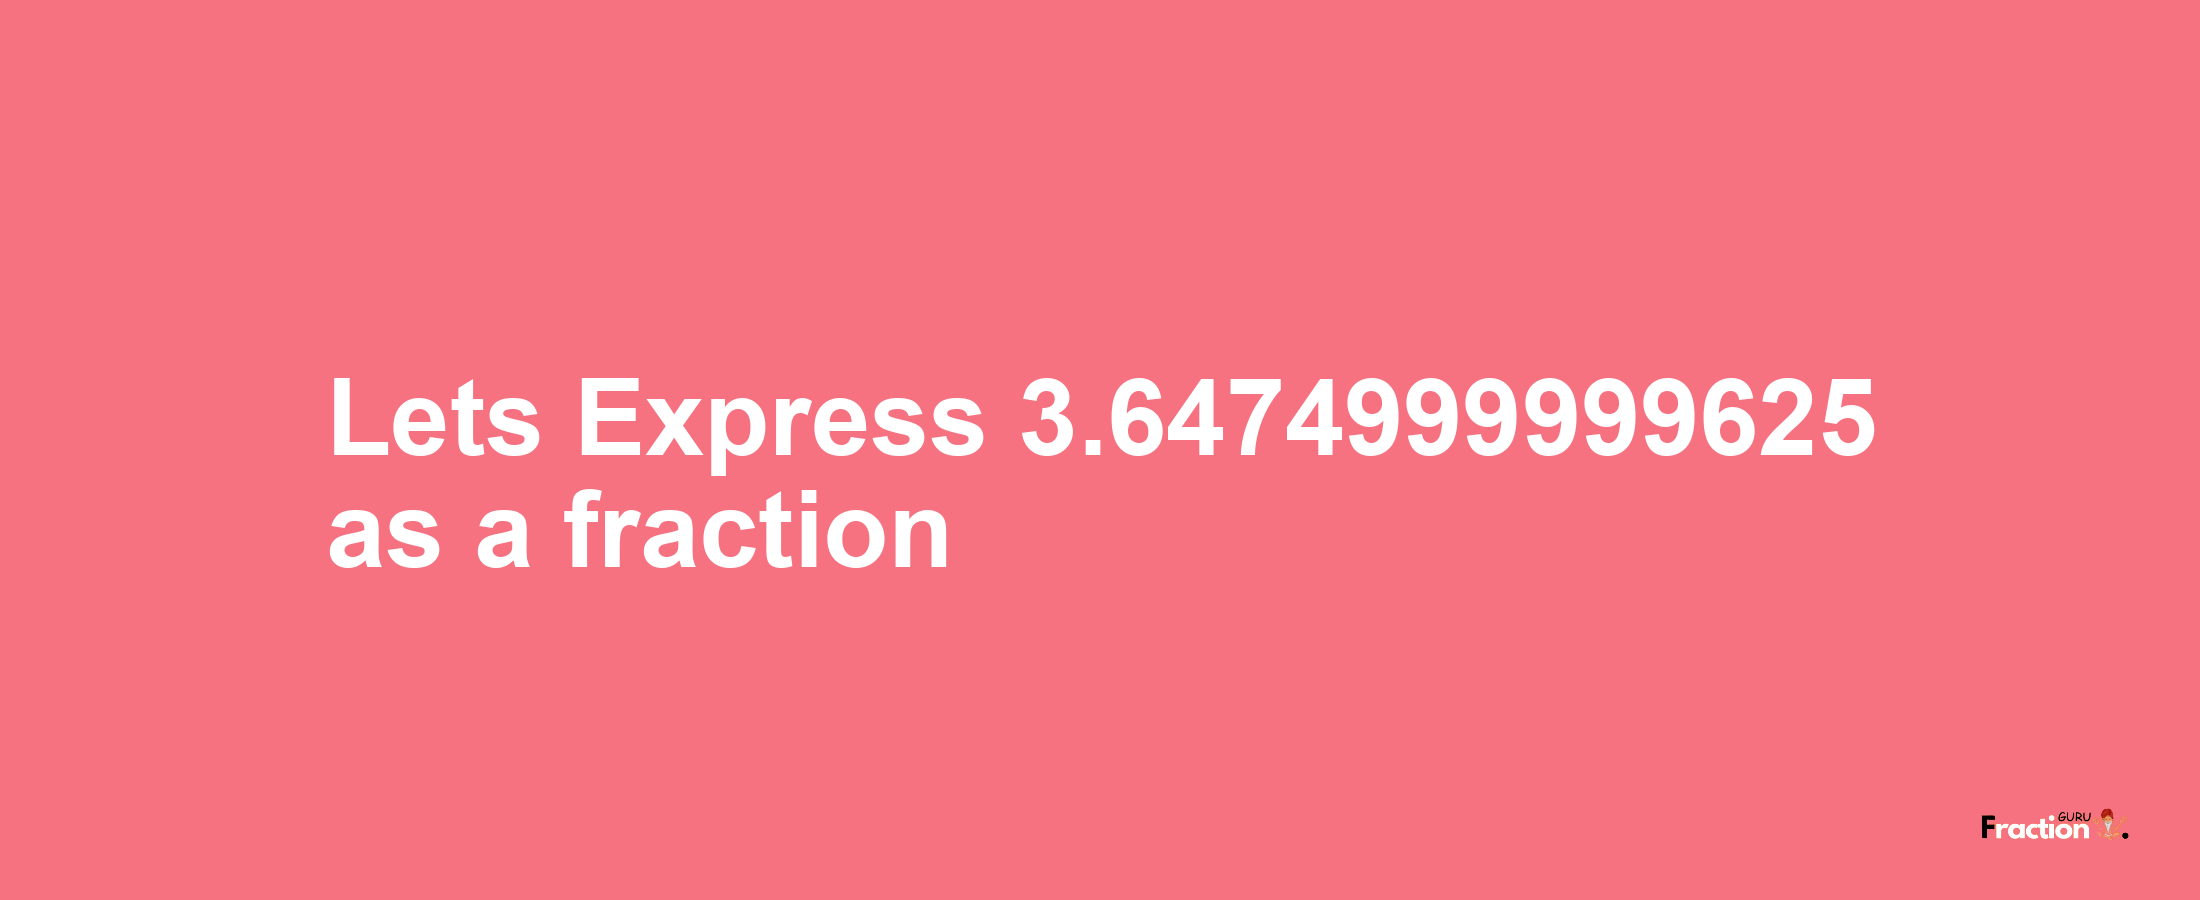 Lets Express 3.6474999999625 as afraction